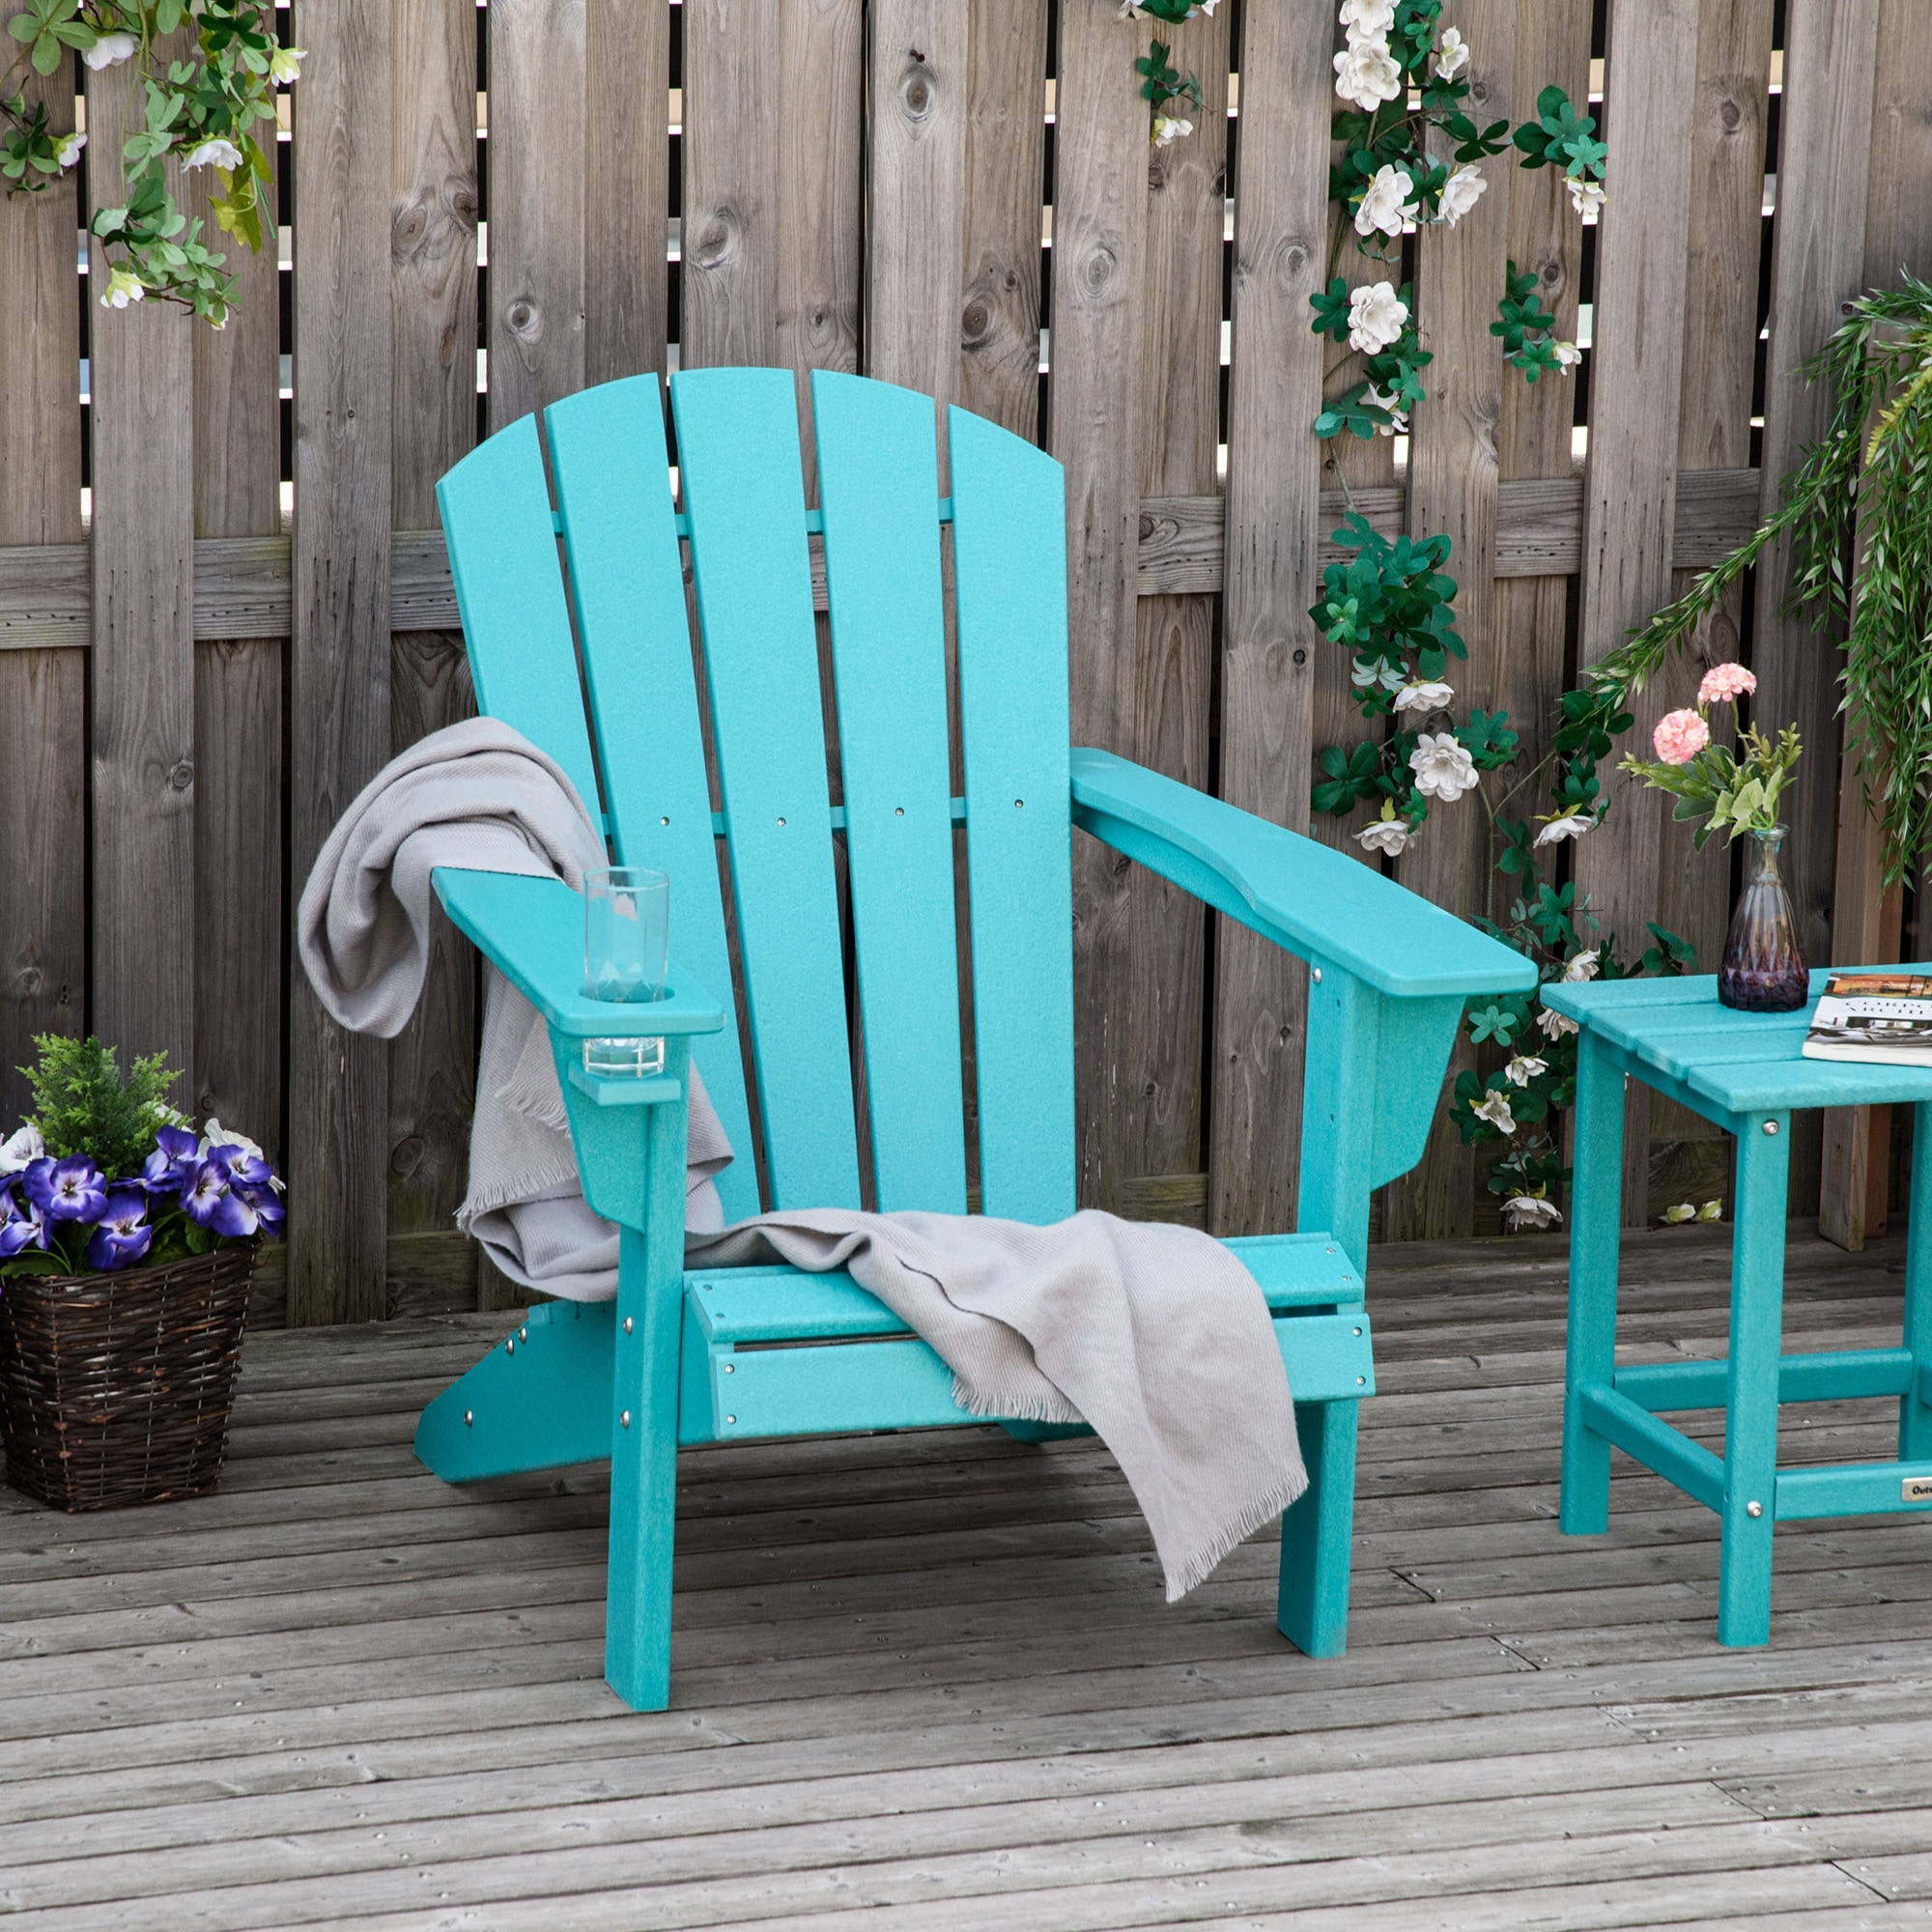 Buy Adirondack Chairs, Black Online at Overstock | Our Best Patio Furniture Deals